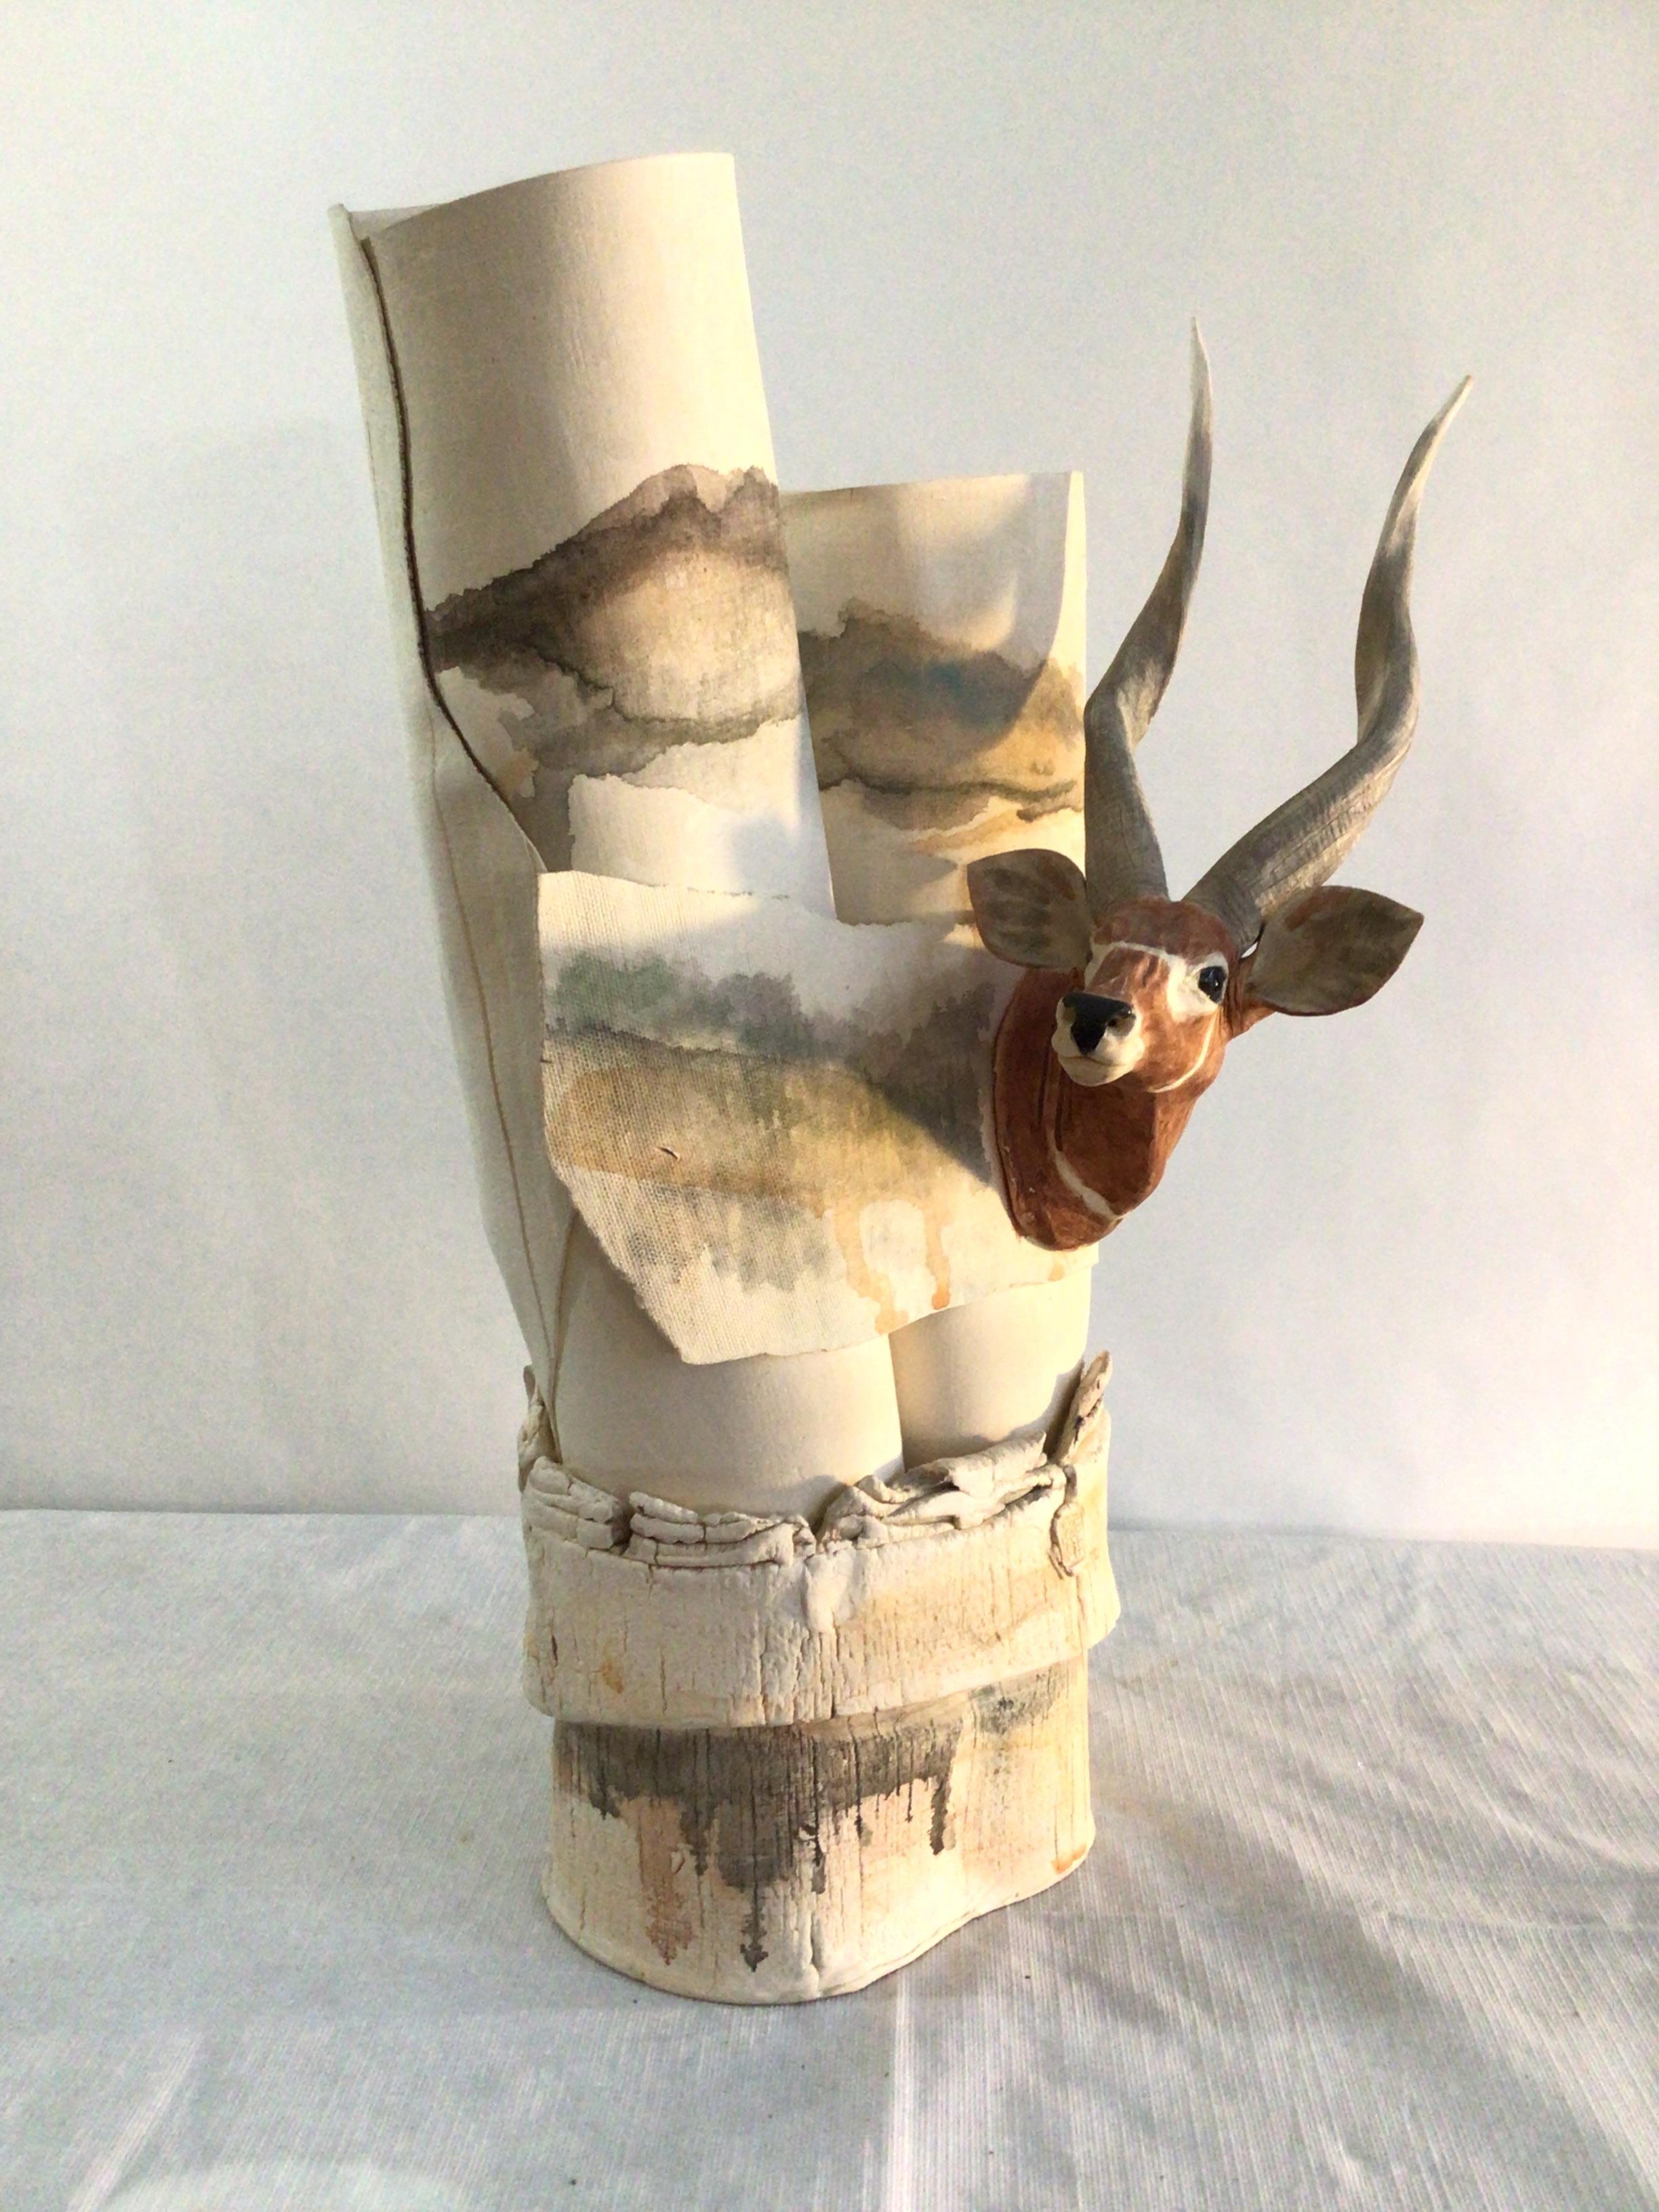 This Unique 1970s Thin Wrapped Pottery Sculpture features an Antelope or Gazelle with Black Glass Eyes
Parts of the pottery have texture resembling cloth/fabric 
Pottery Has A Stamp and the marking '79 
Colors: Cream, Earth tones, Watercolor,